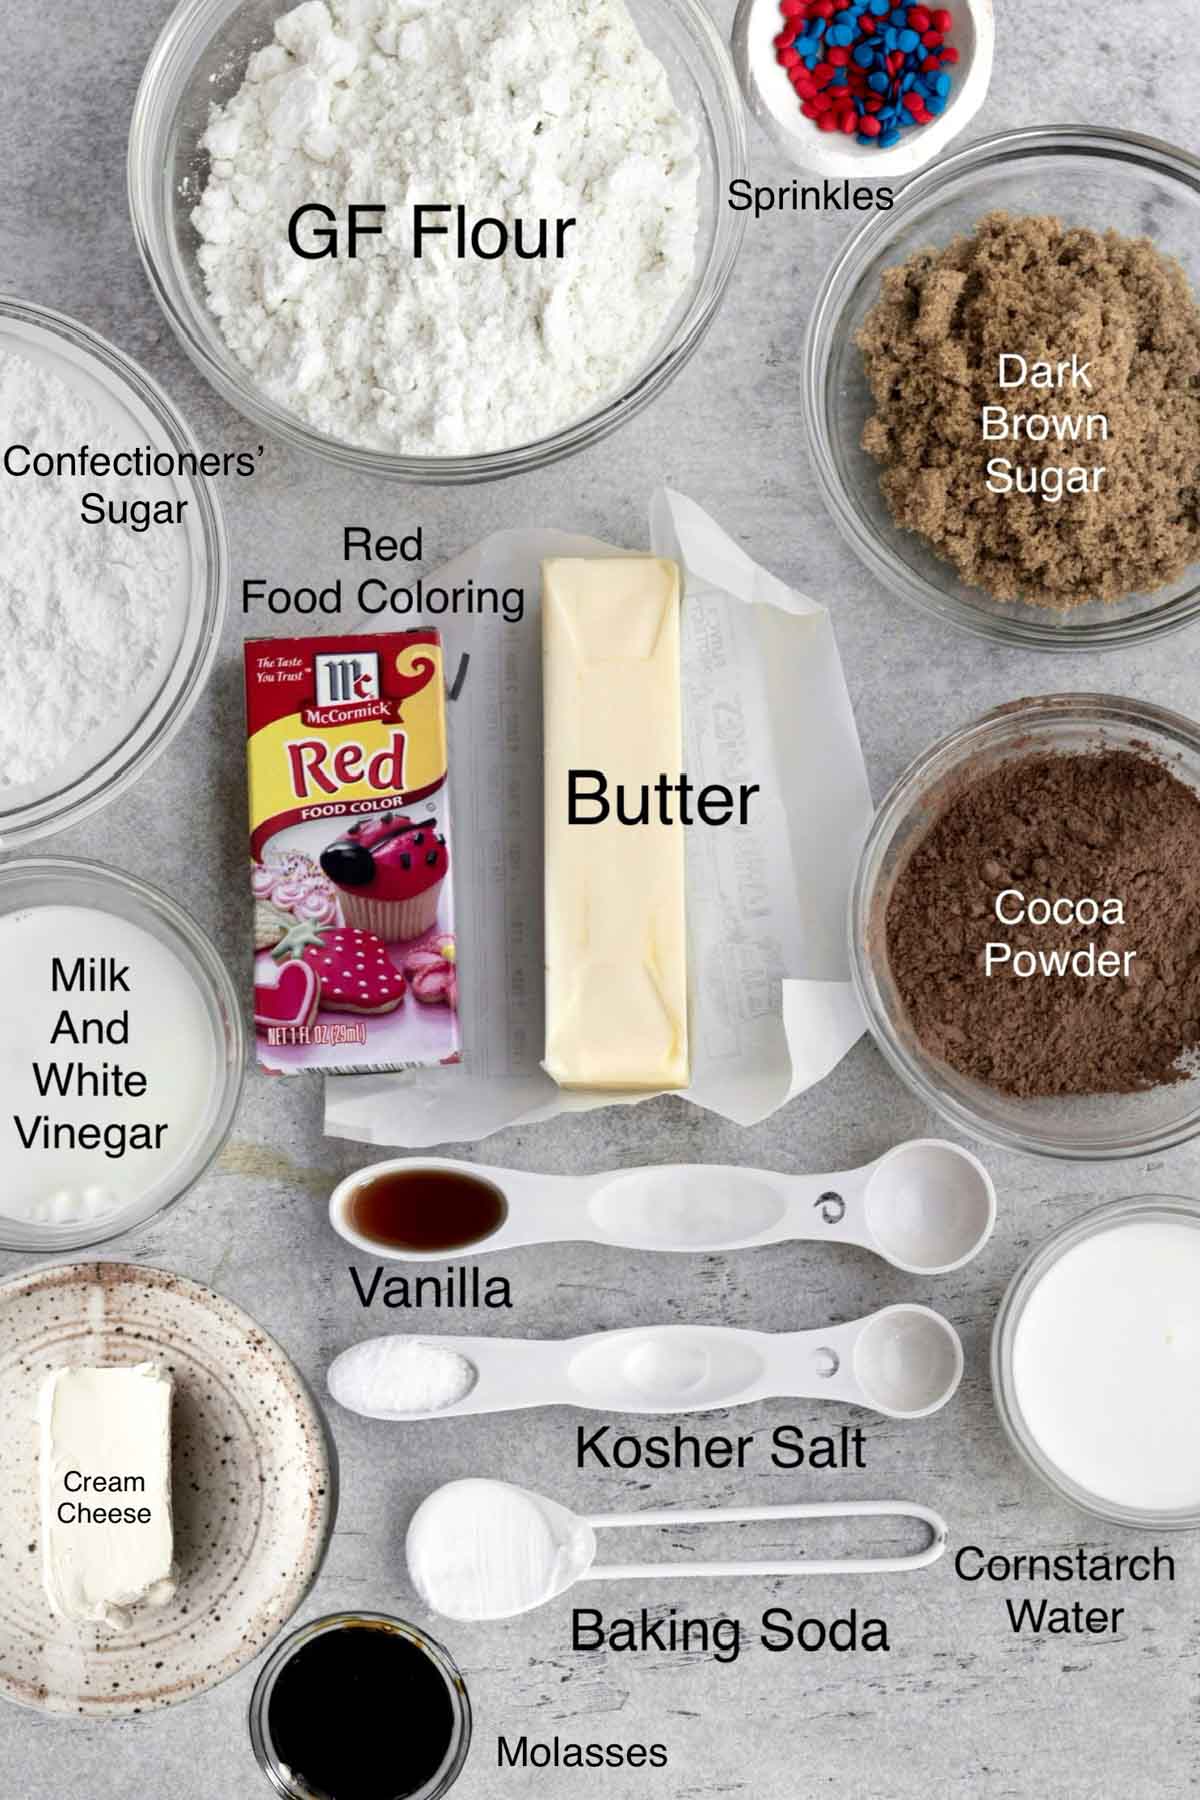 Gluten free flour, red and blue sprinkles, confectioners' sugar, red food coloring, butter, dark brown sugar, milk and white vinegar, vanilla, cocoa powder, cream cheese, kosher salt, cornstarch water, baking soda and molasses in separate containers.